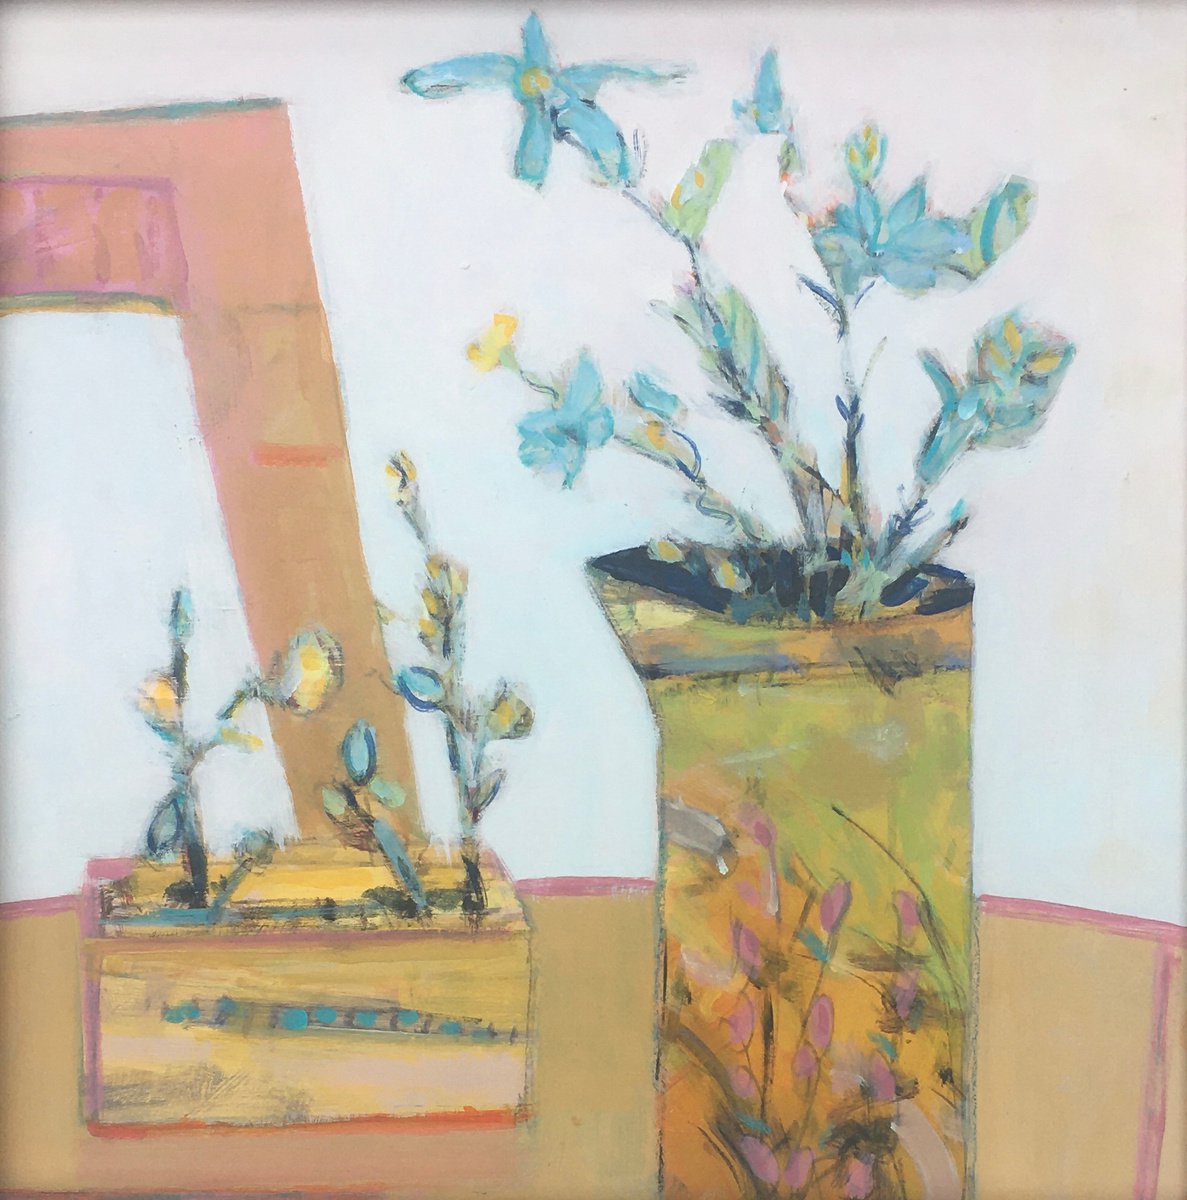 White Space with Flowers. Colourful flower still life by Chrissie Havers